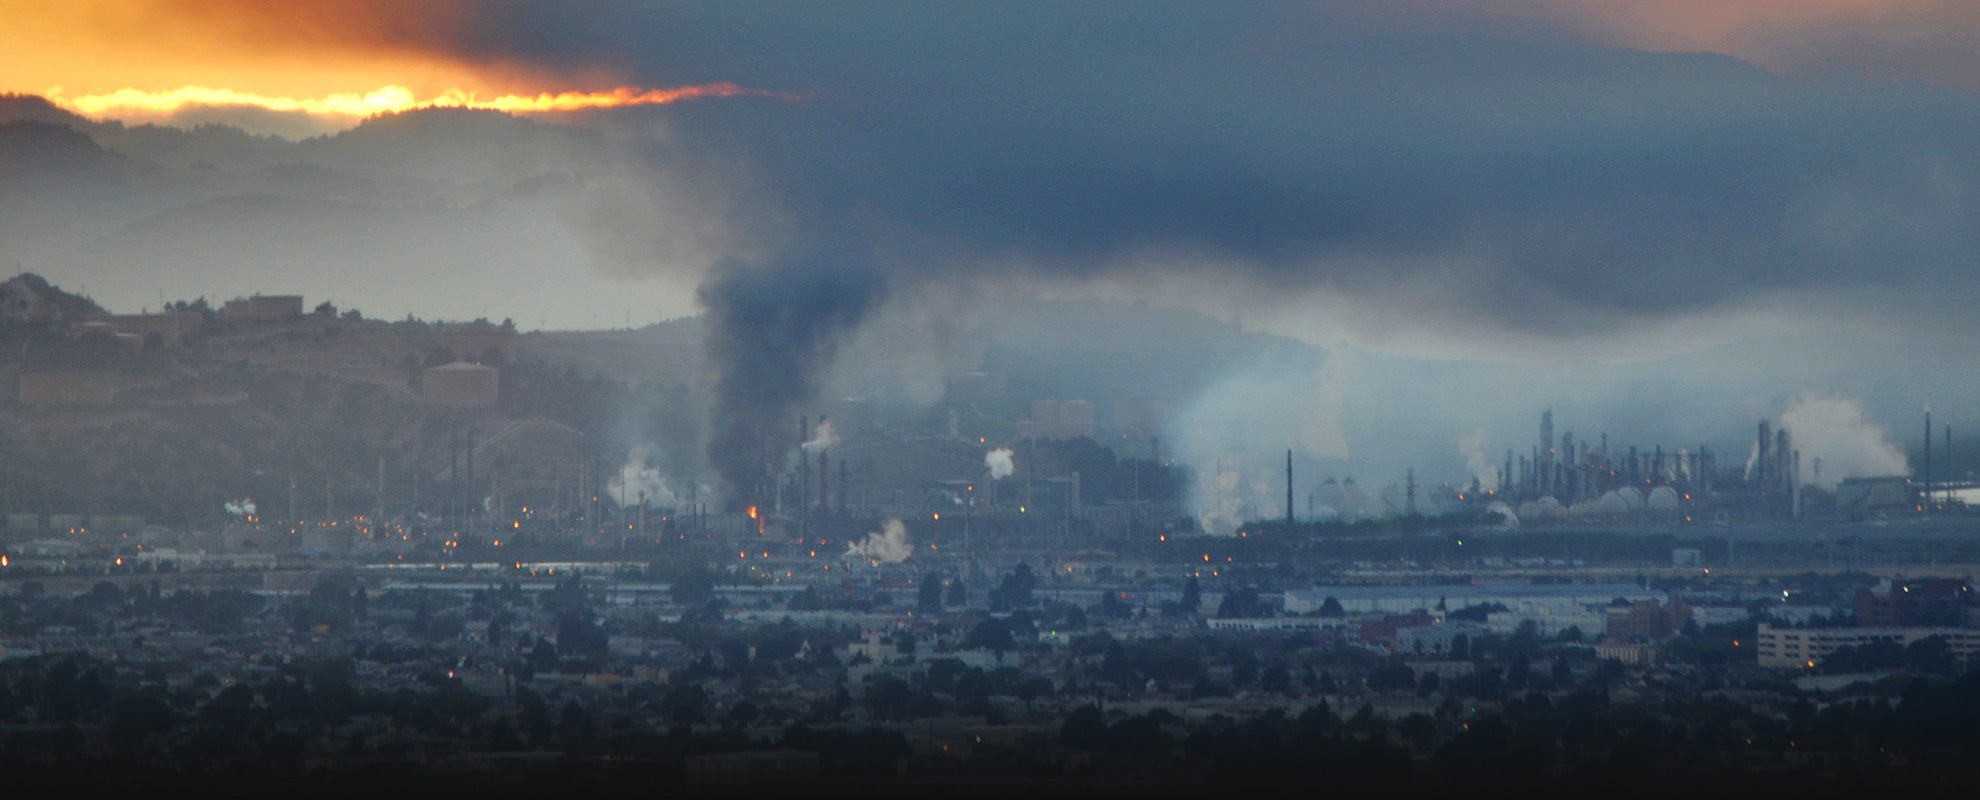 A large fire at Chevron's refinery in Richmond, California, on August 6, 2012.